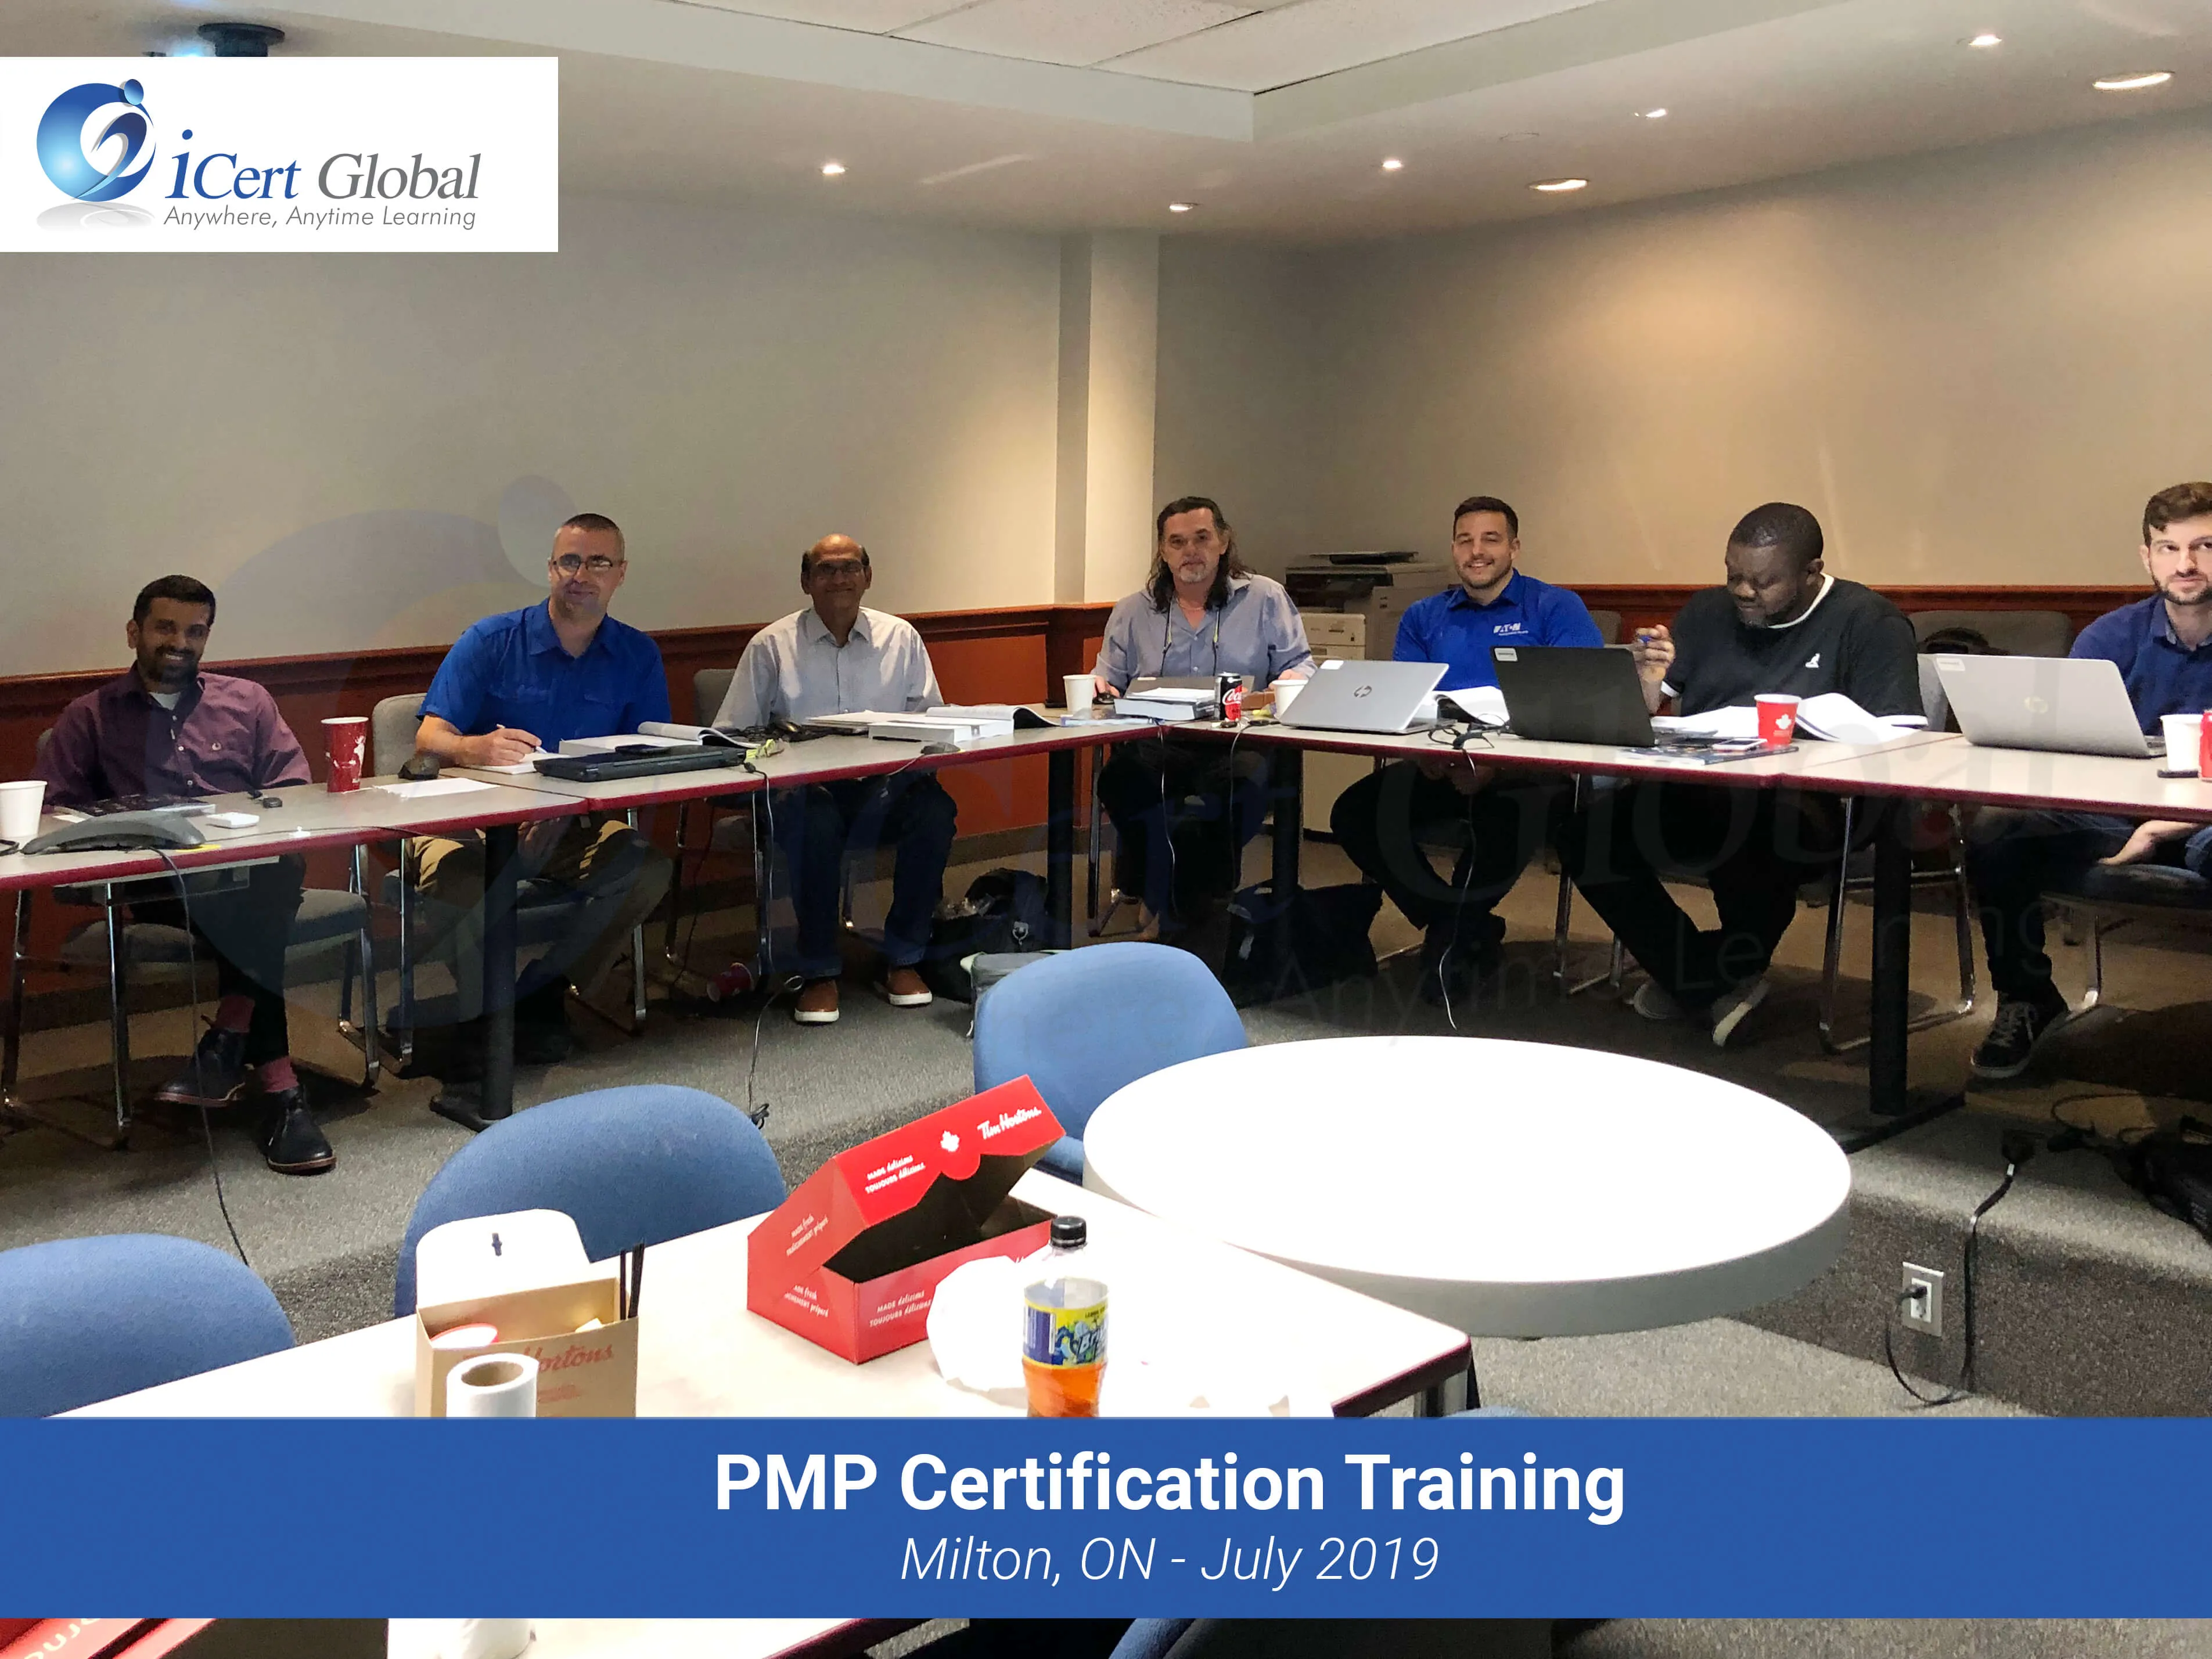 PMP Certification Training Exam Prep Classroom Course in Milton, Ontario, Canada in July 2019  